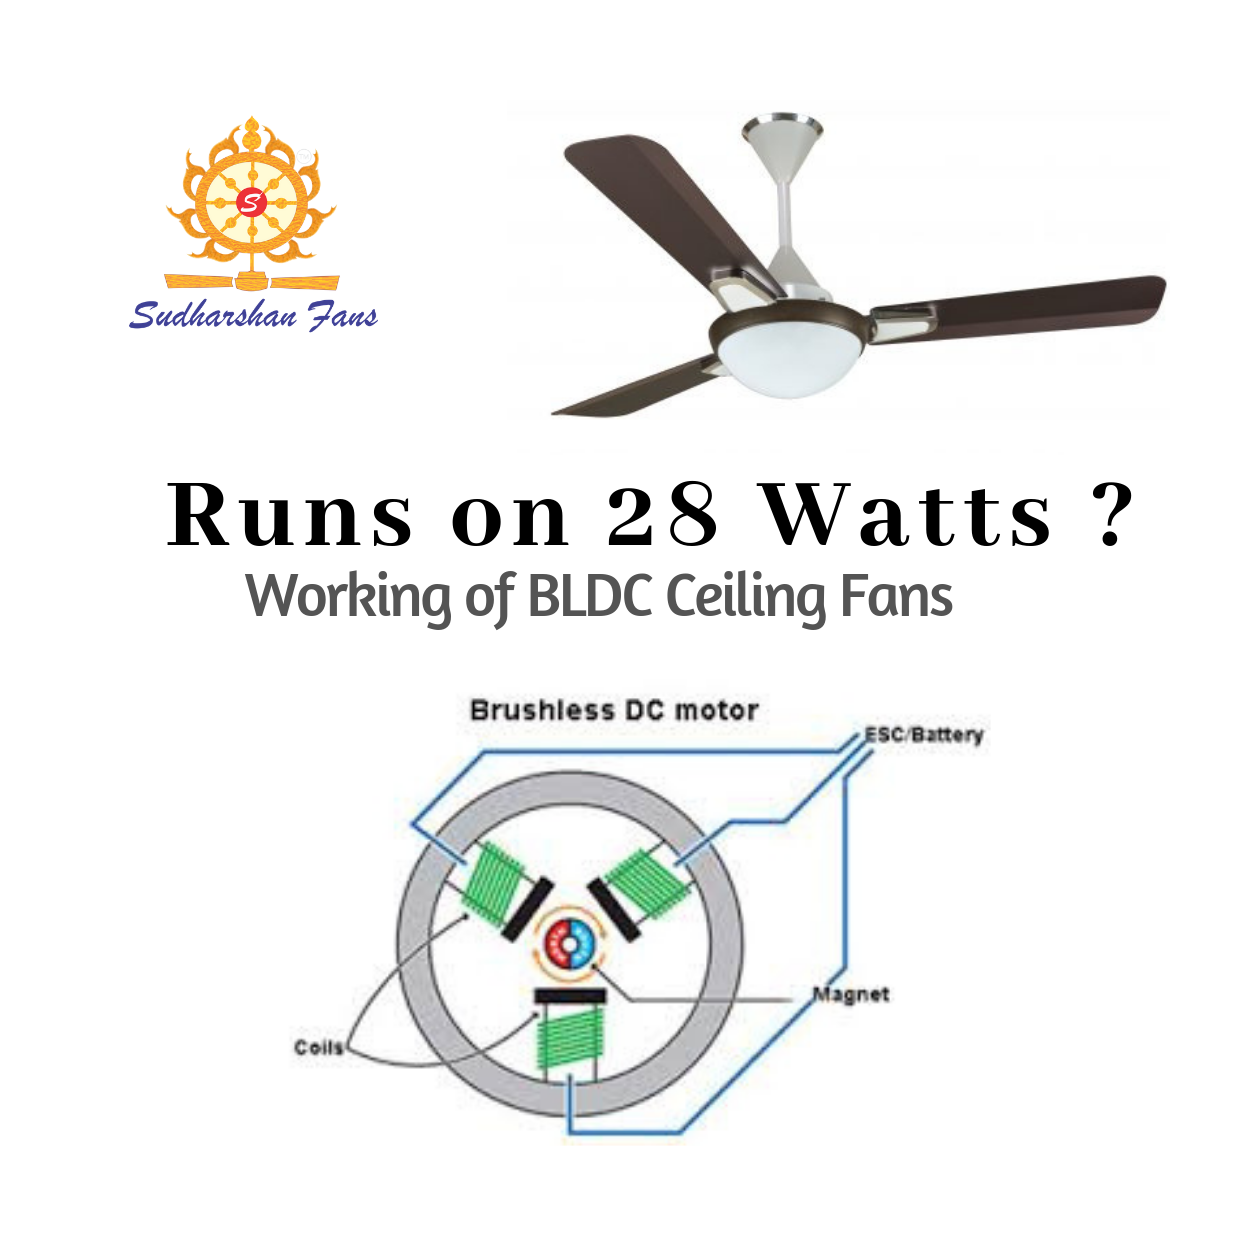 Why Bldc Ceiling Fans Consume Less